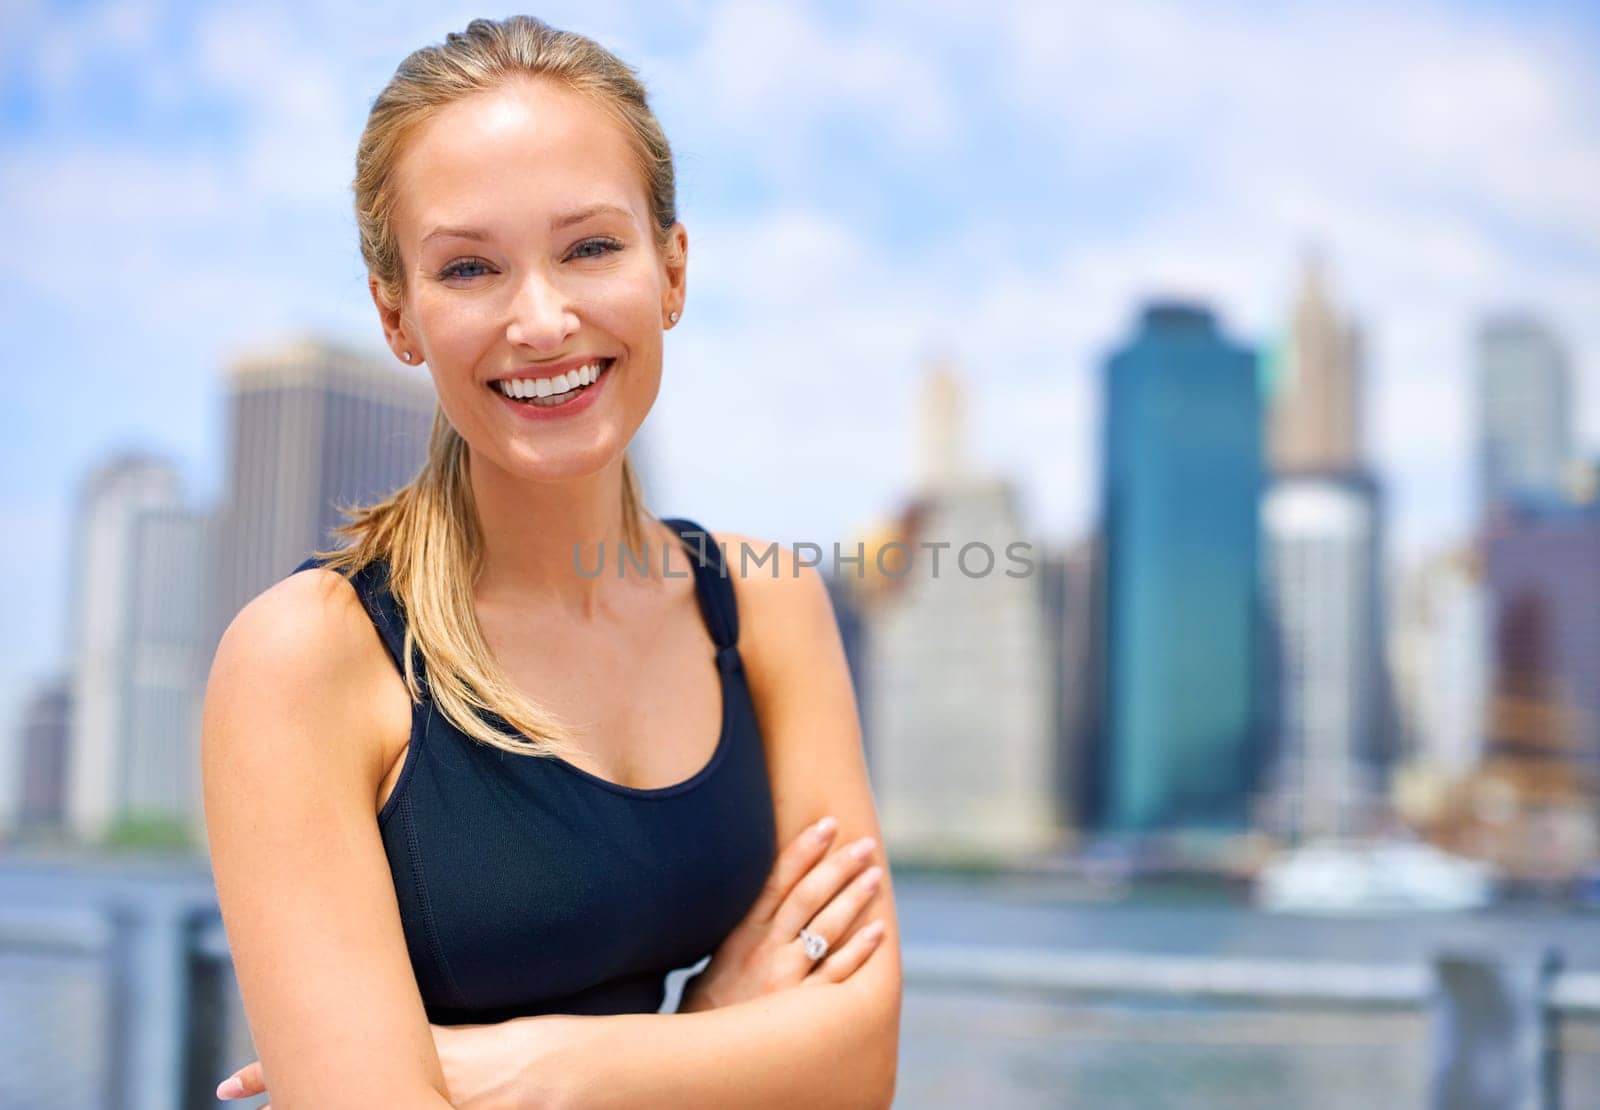 Workout, portrait and woman with arms crossed for fitness, morning exercise or running competition in city. Smile, wellness and face of female person for cardio, energy and confidence in New York.